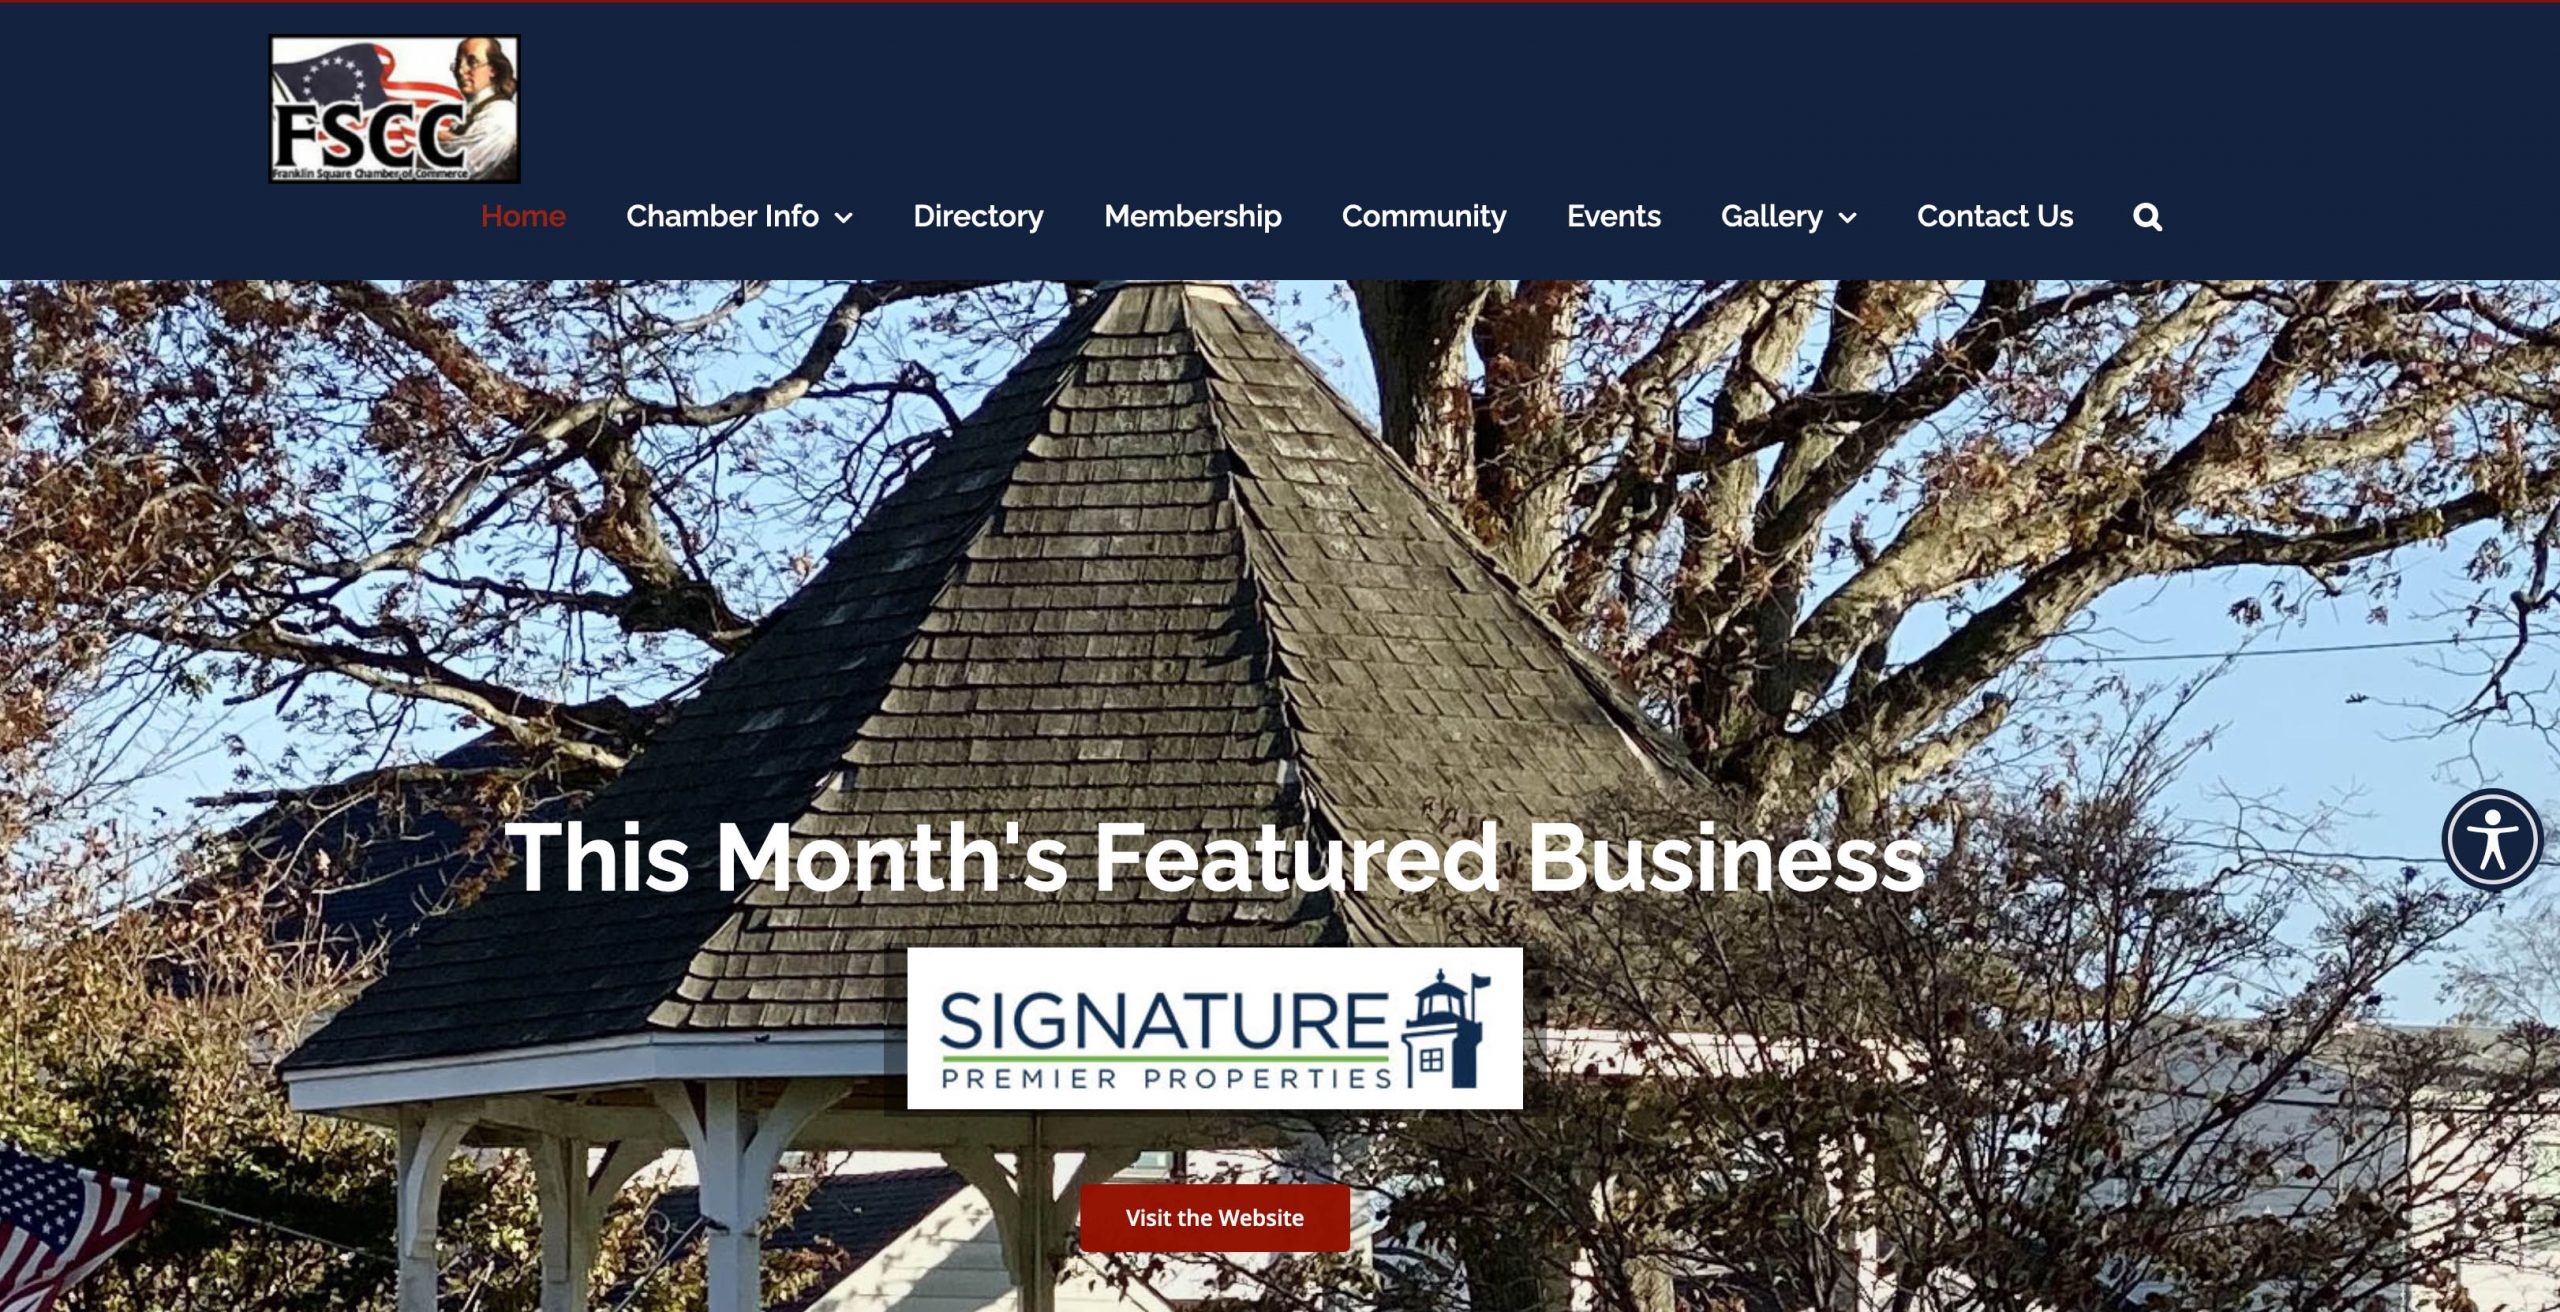 Franklin Square Chamber of Commerce client